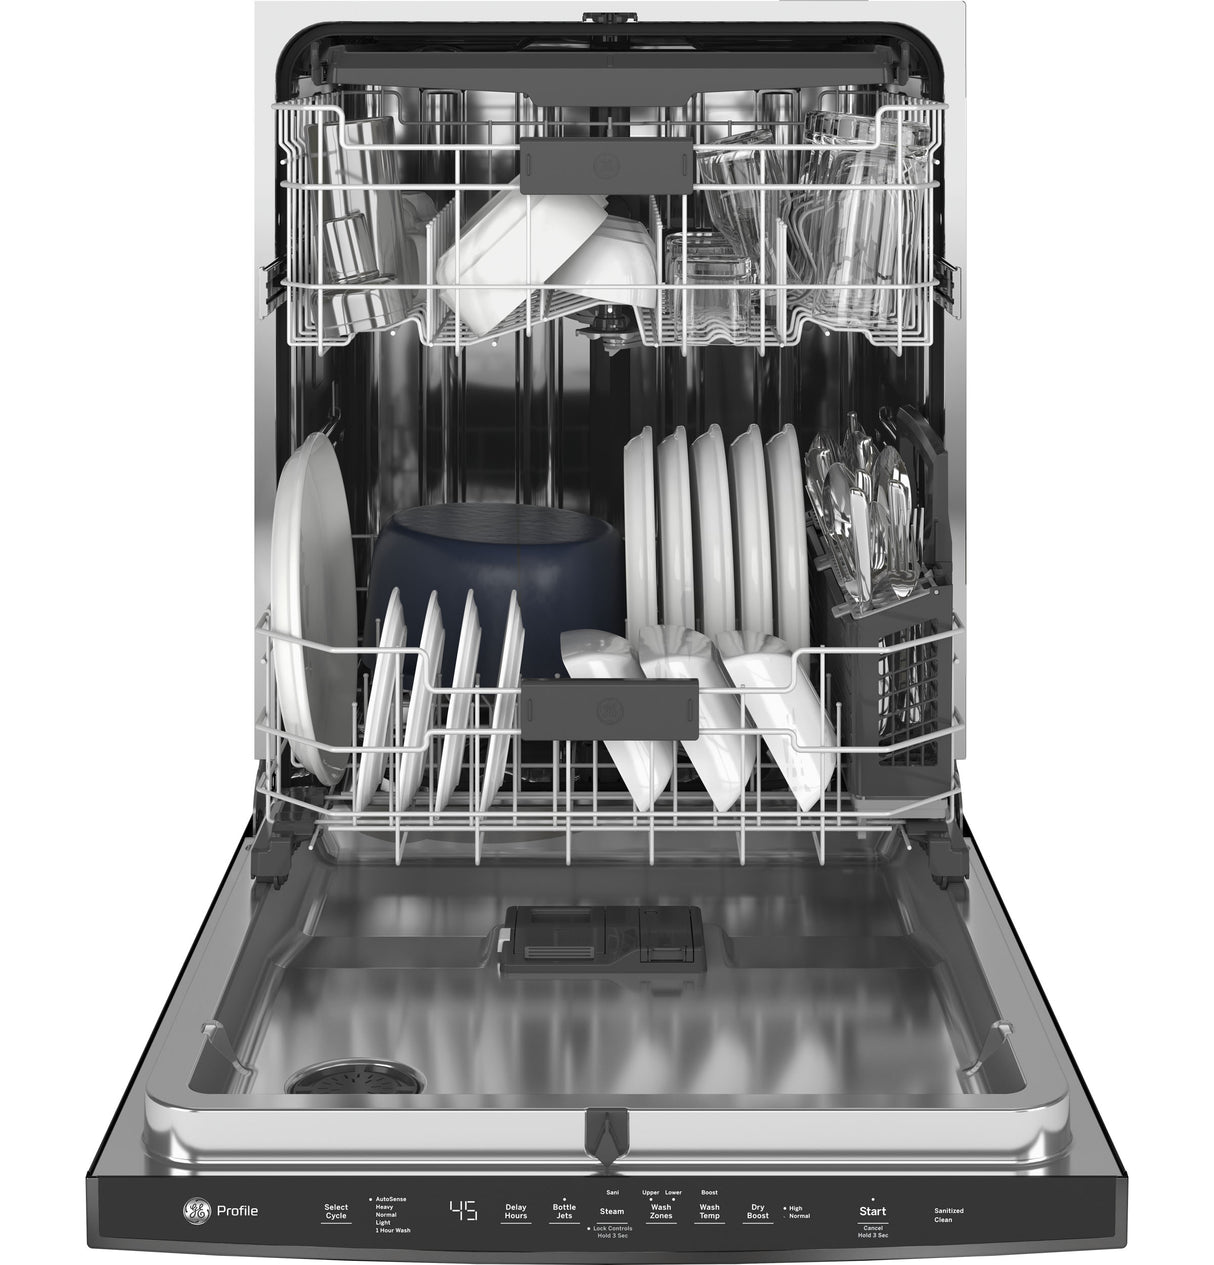 GE Profile(TM) ENERGY STAR(R) Top Control with Stainless Steel Interior Dishwasher with Sanitize Cycle & Dry Boost with Fan Assist - (PDT715SBNTS)